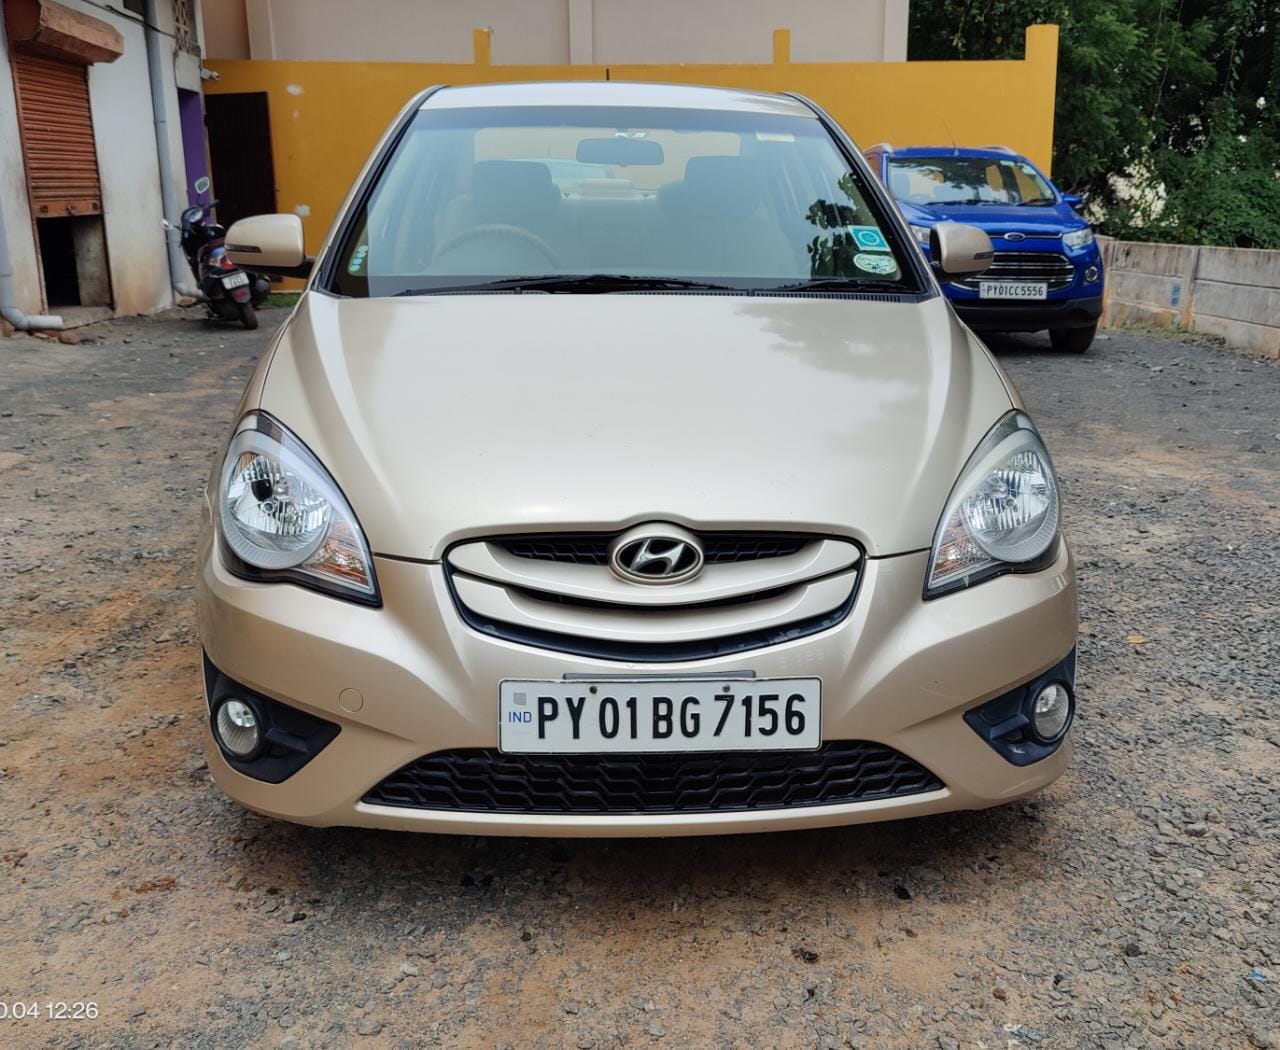 4530-for-sale-Hyundai-Verna-Transform-Diesel-First-Owner-2011-PY-registered-rs-295000